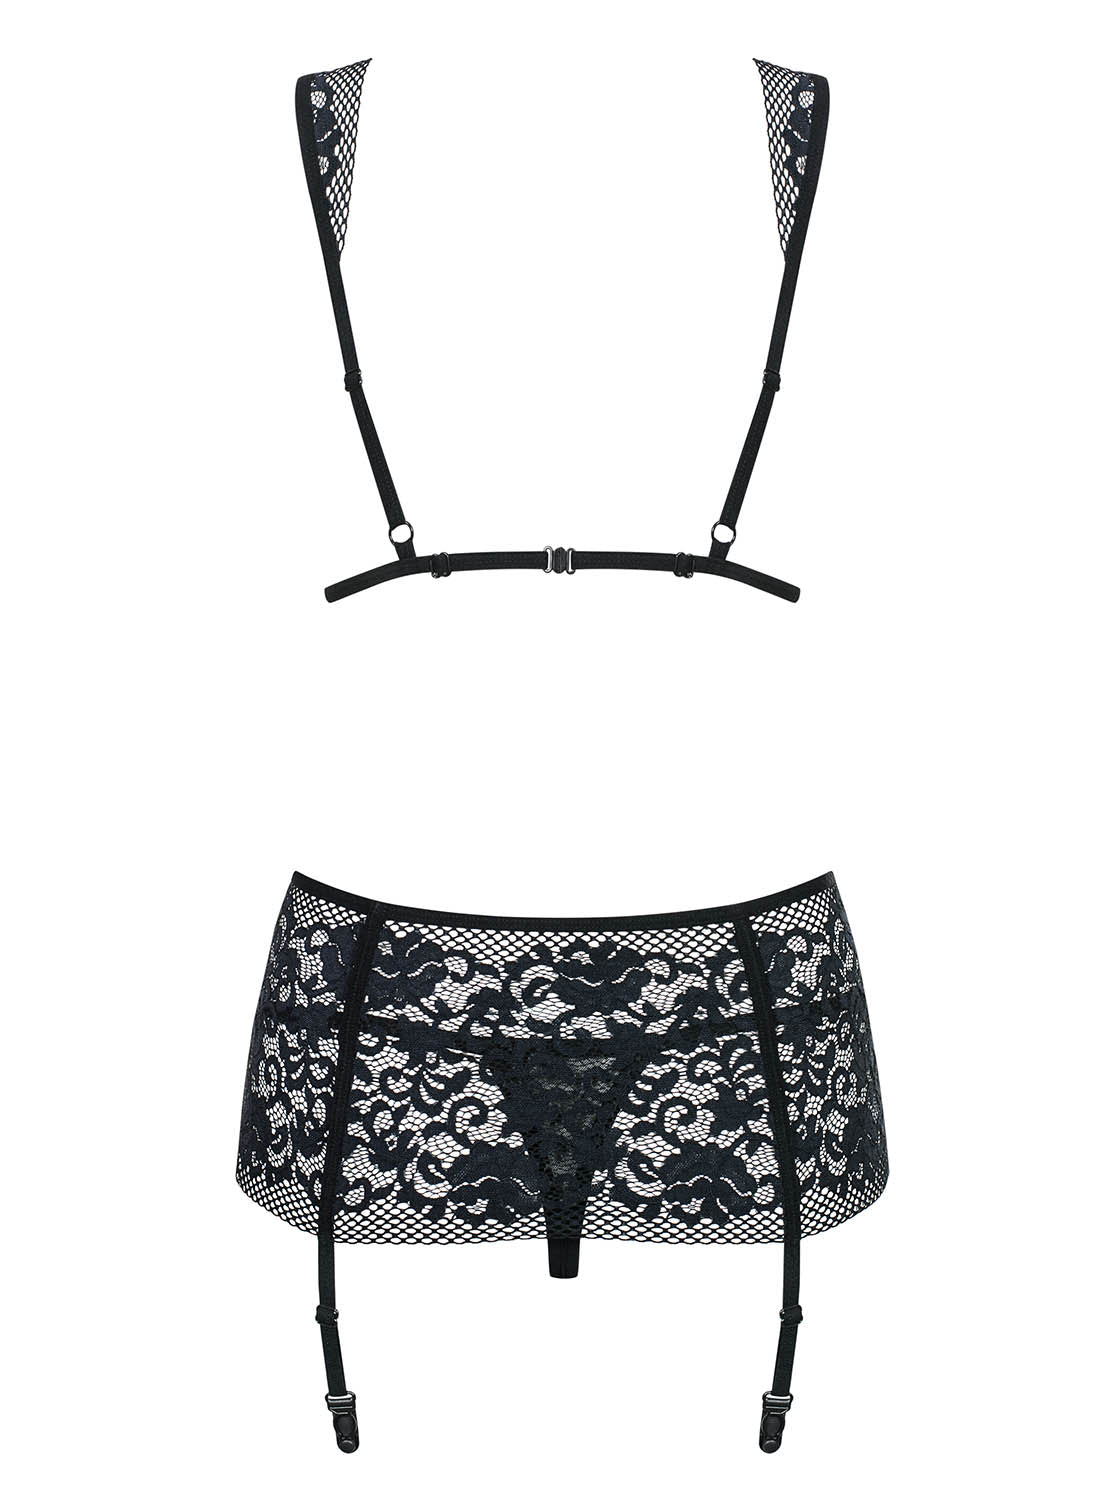 Figurea a feminine lace set in black consisting of underwire bra, garter belt and a matching thong